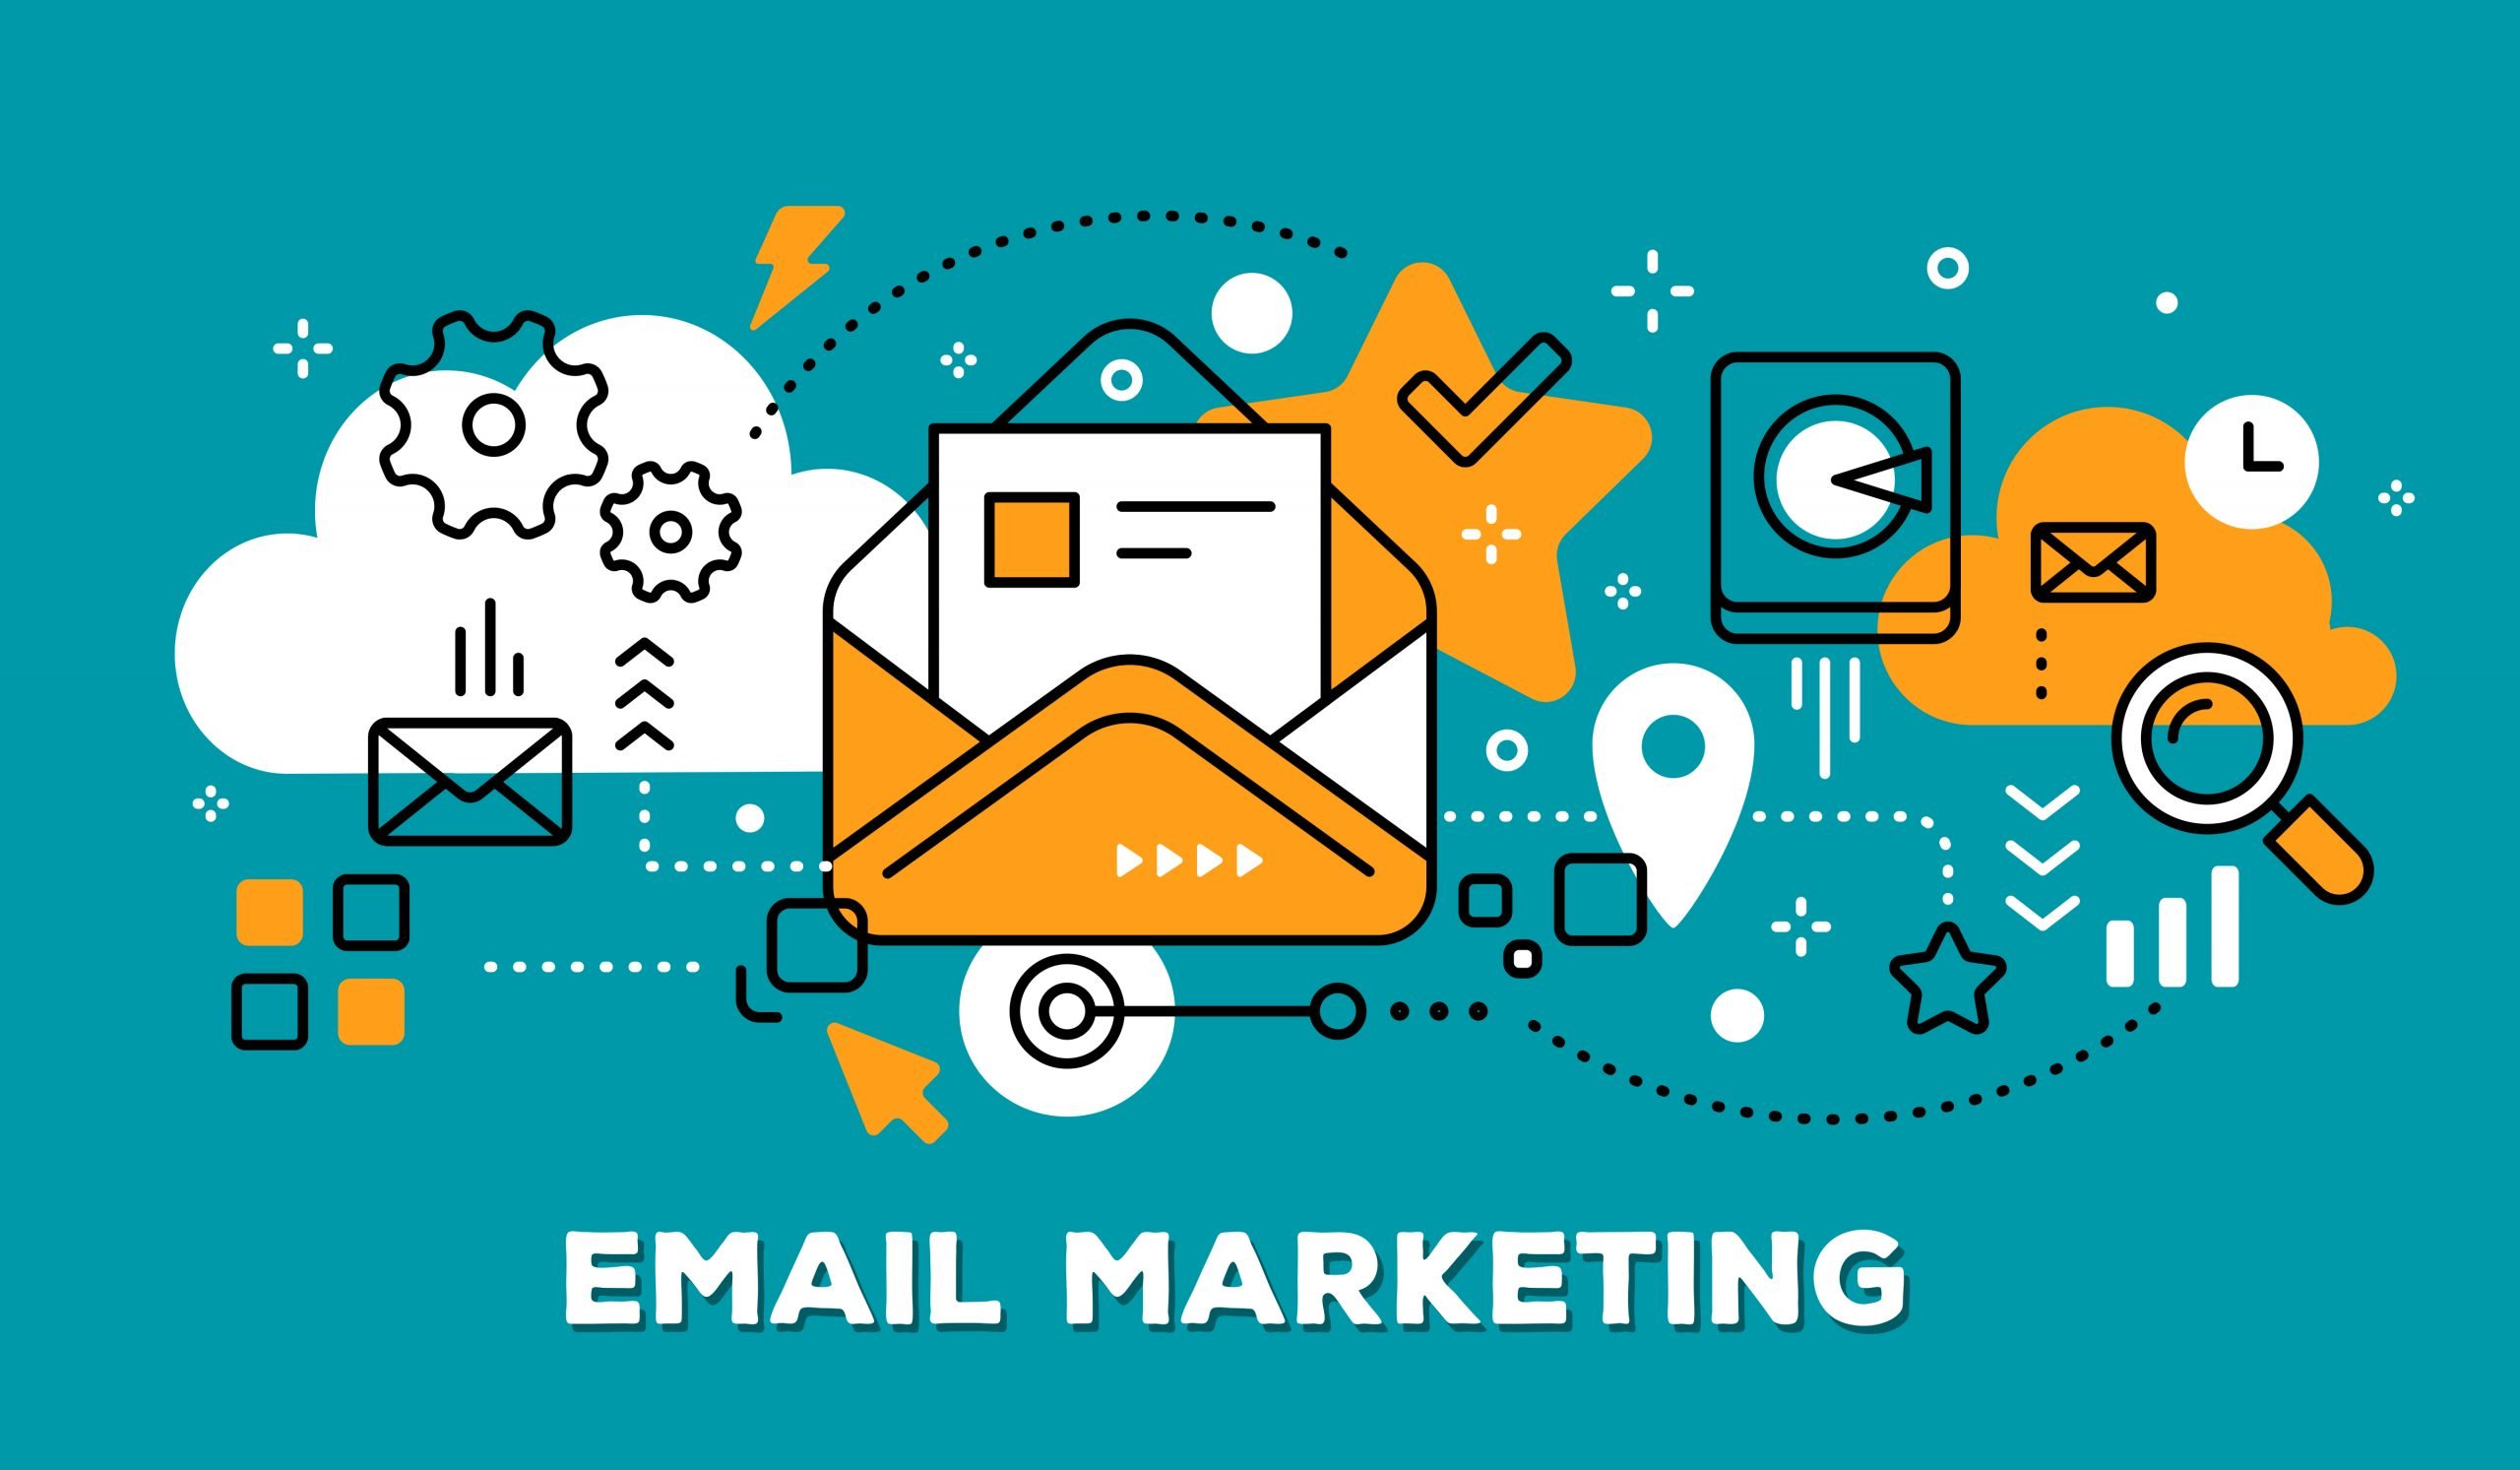 How to choose the best email marketing platforms for eCommerce